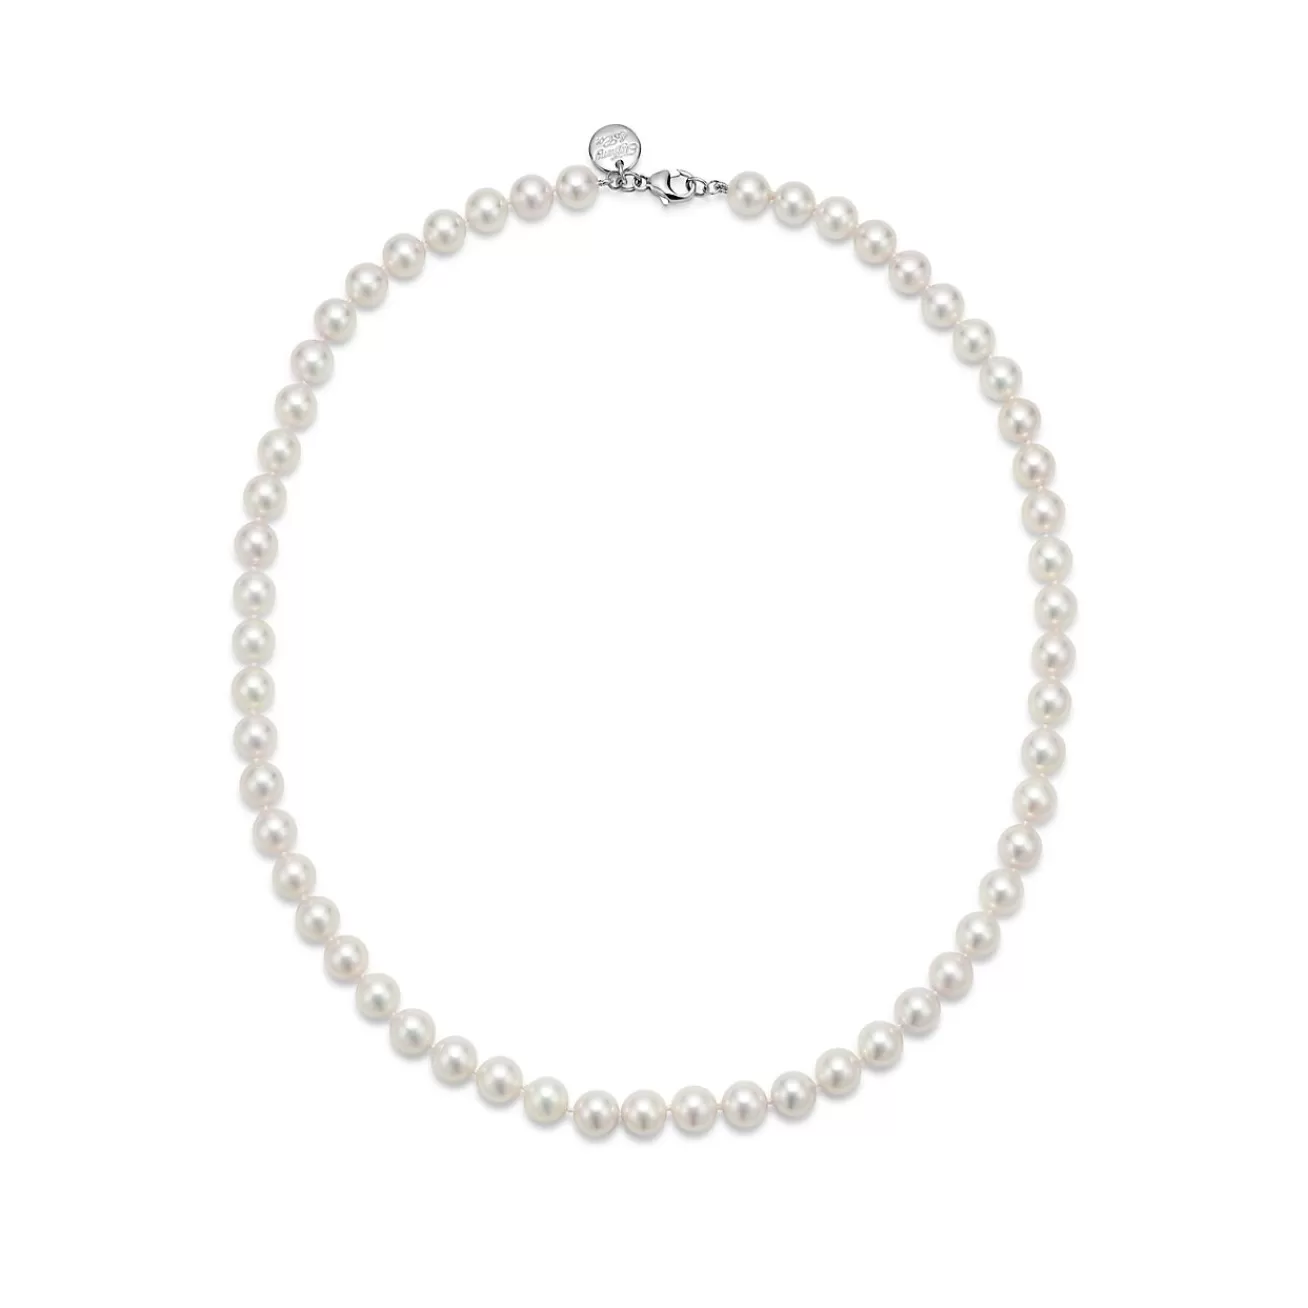 Tiffany & Co. Tiffany Essential Pearls necklace of Akoya pearls with an 18k white gold clasp. | ^ Pearl Jewelry